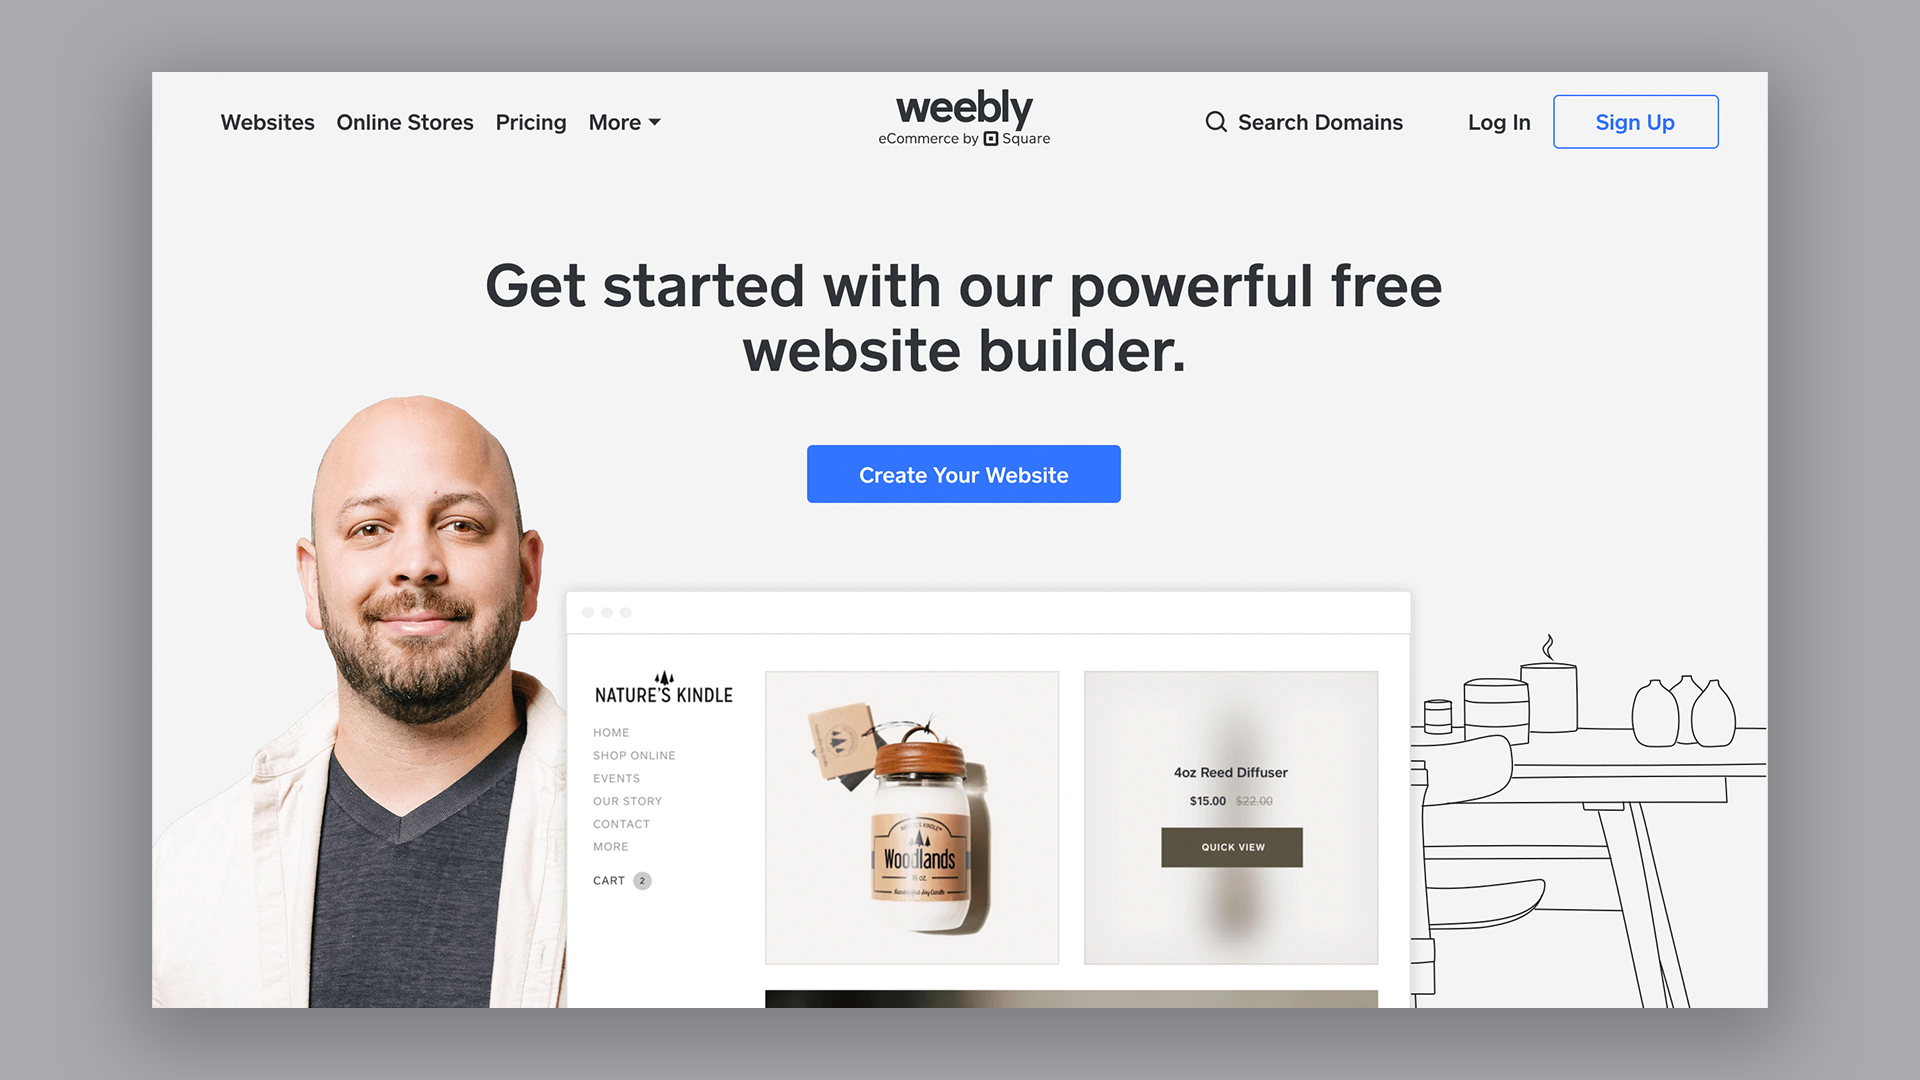 Homepage of Weebly, one of the best blogging platforms, showing smiling man, website page and illustration of food on a table